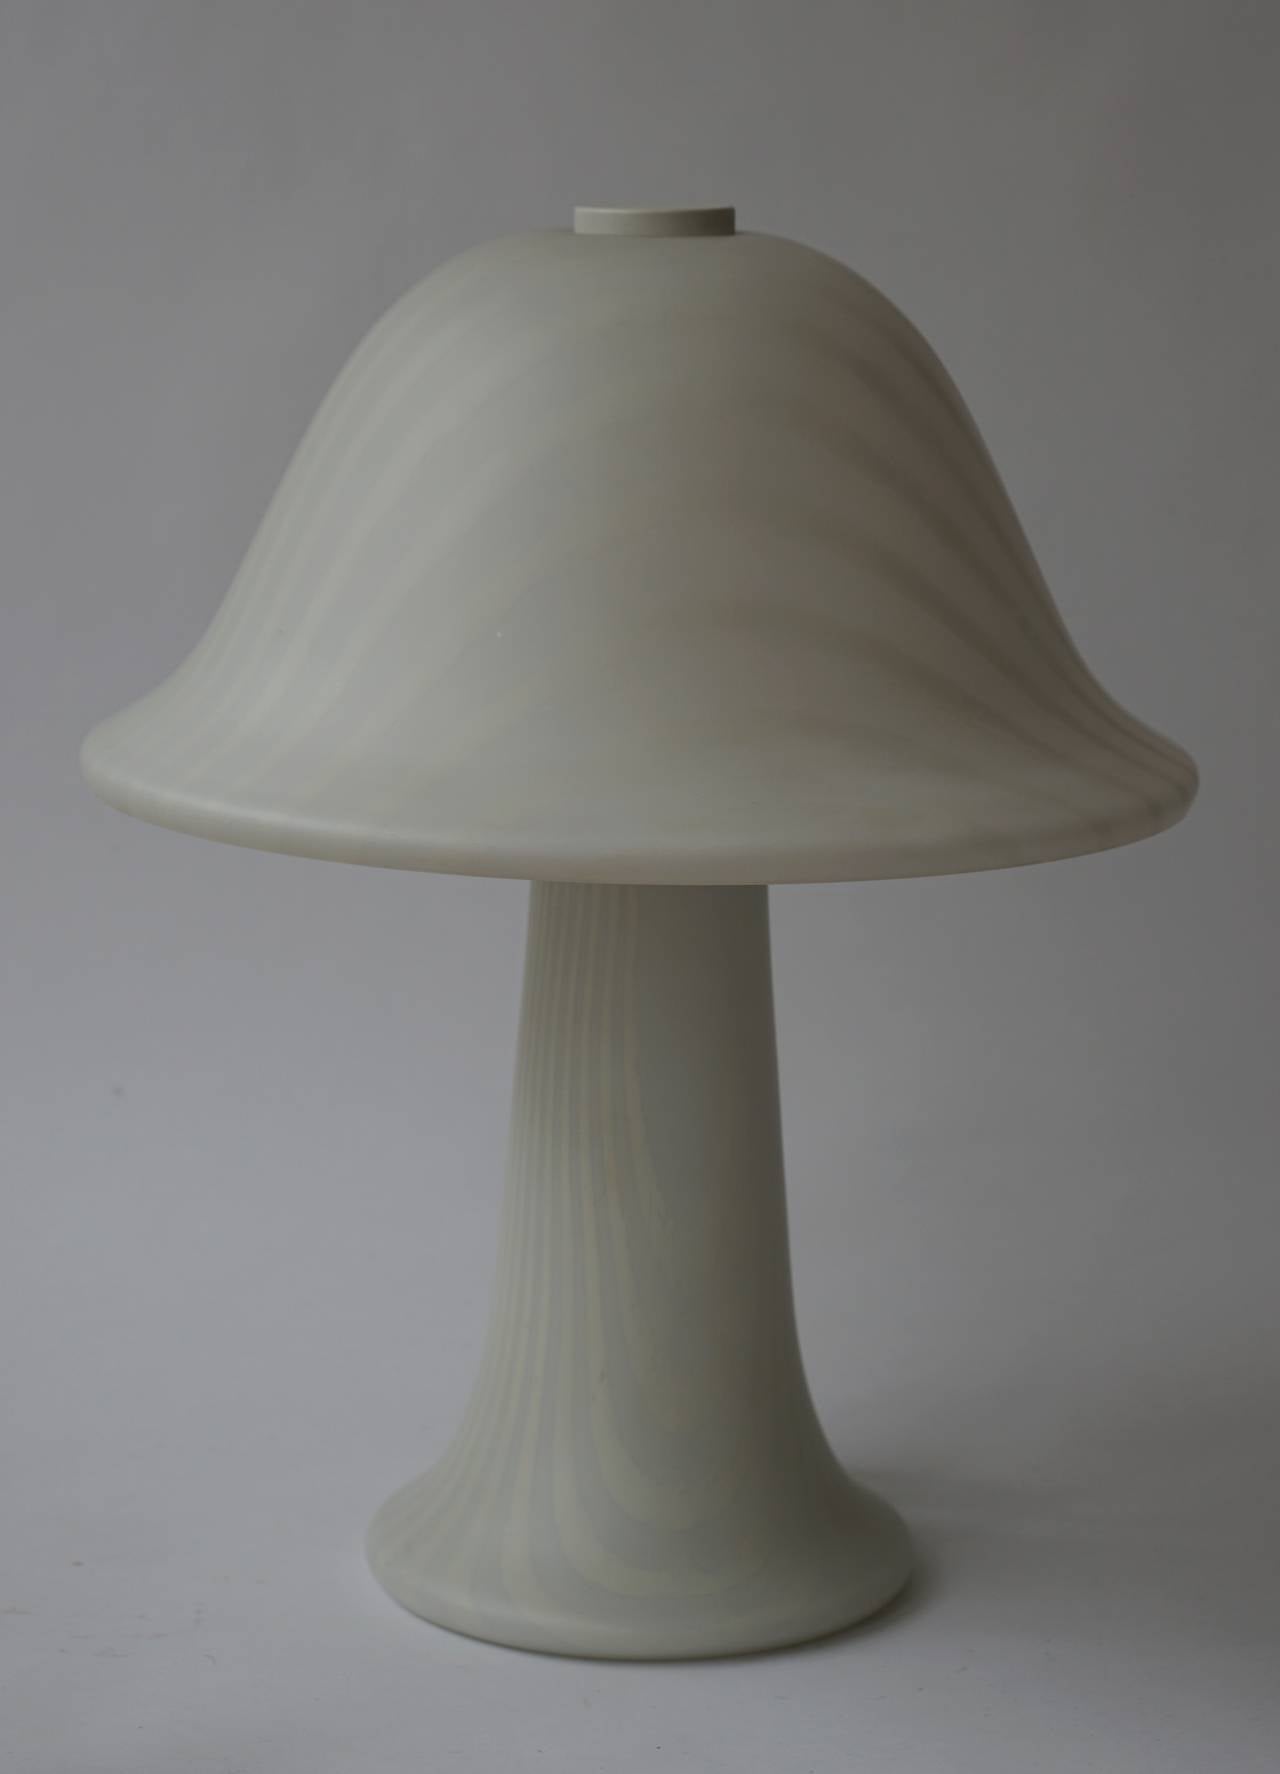 Mushroom style, white frosted glass, with swirl pattern throughout the body and shade. 
Made in Germany.